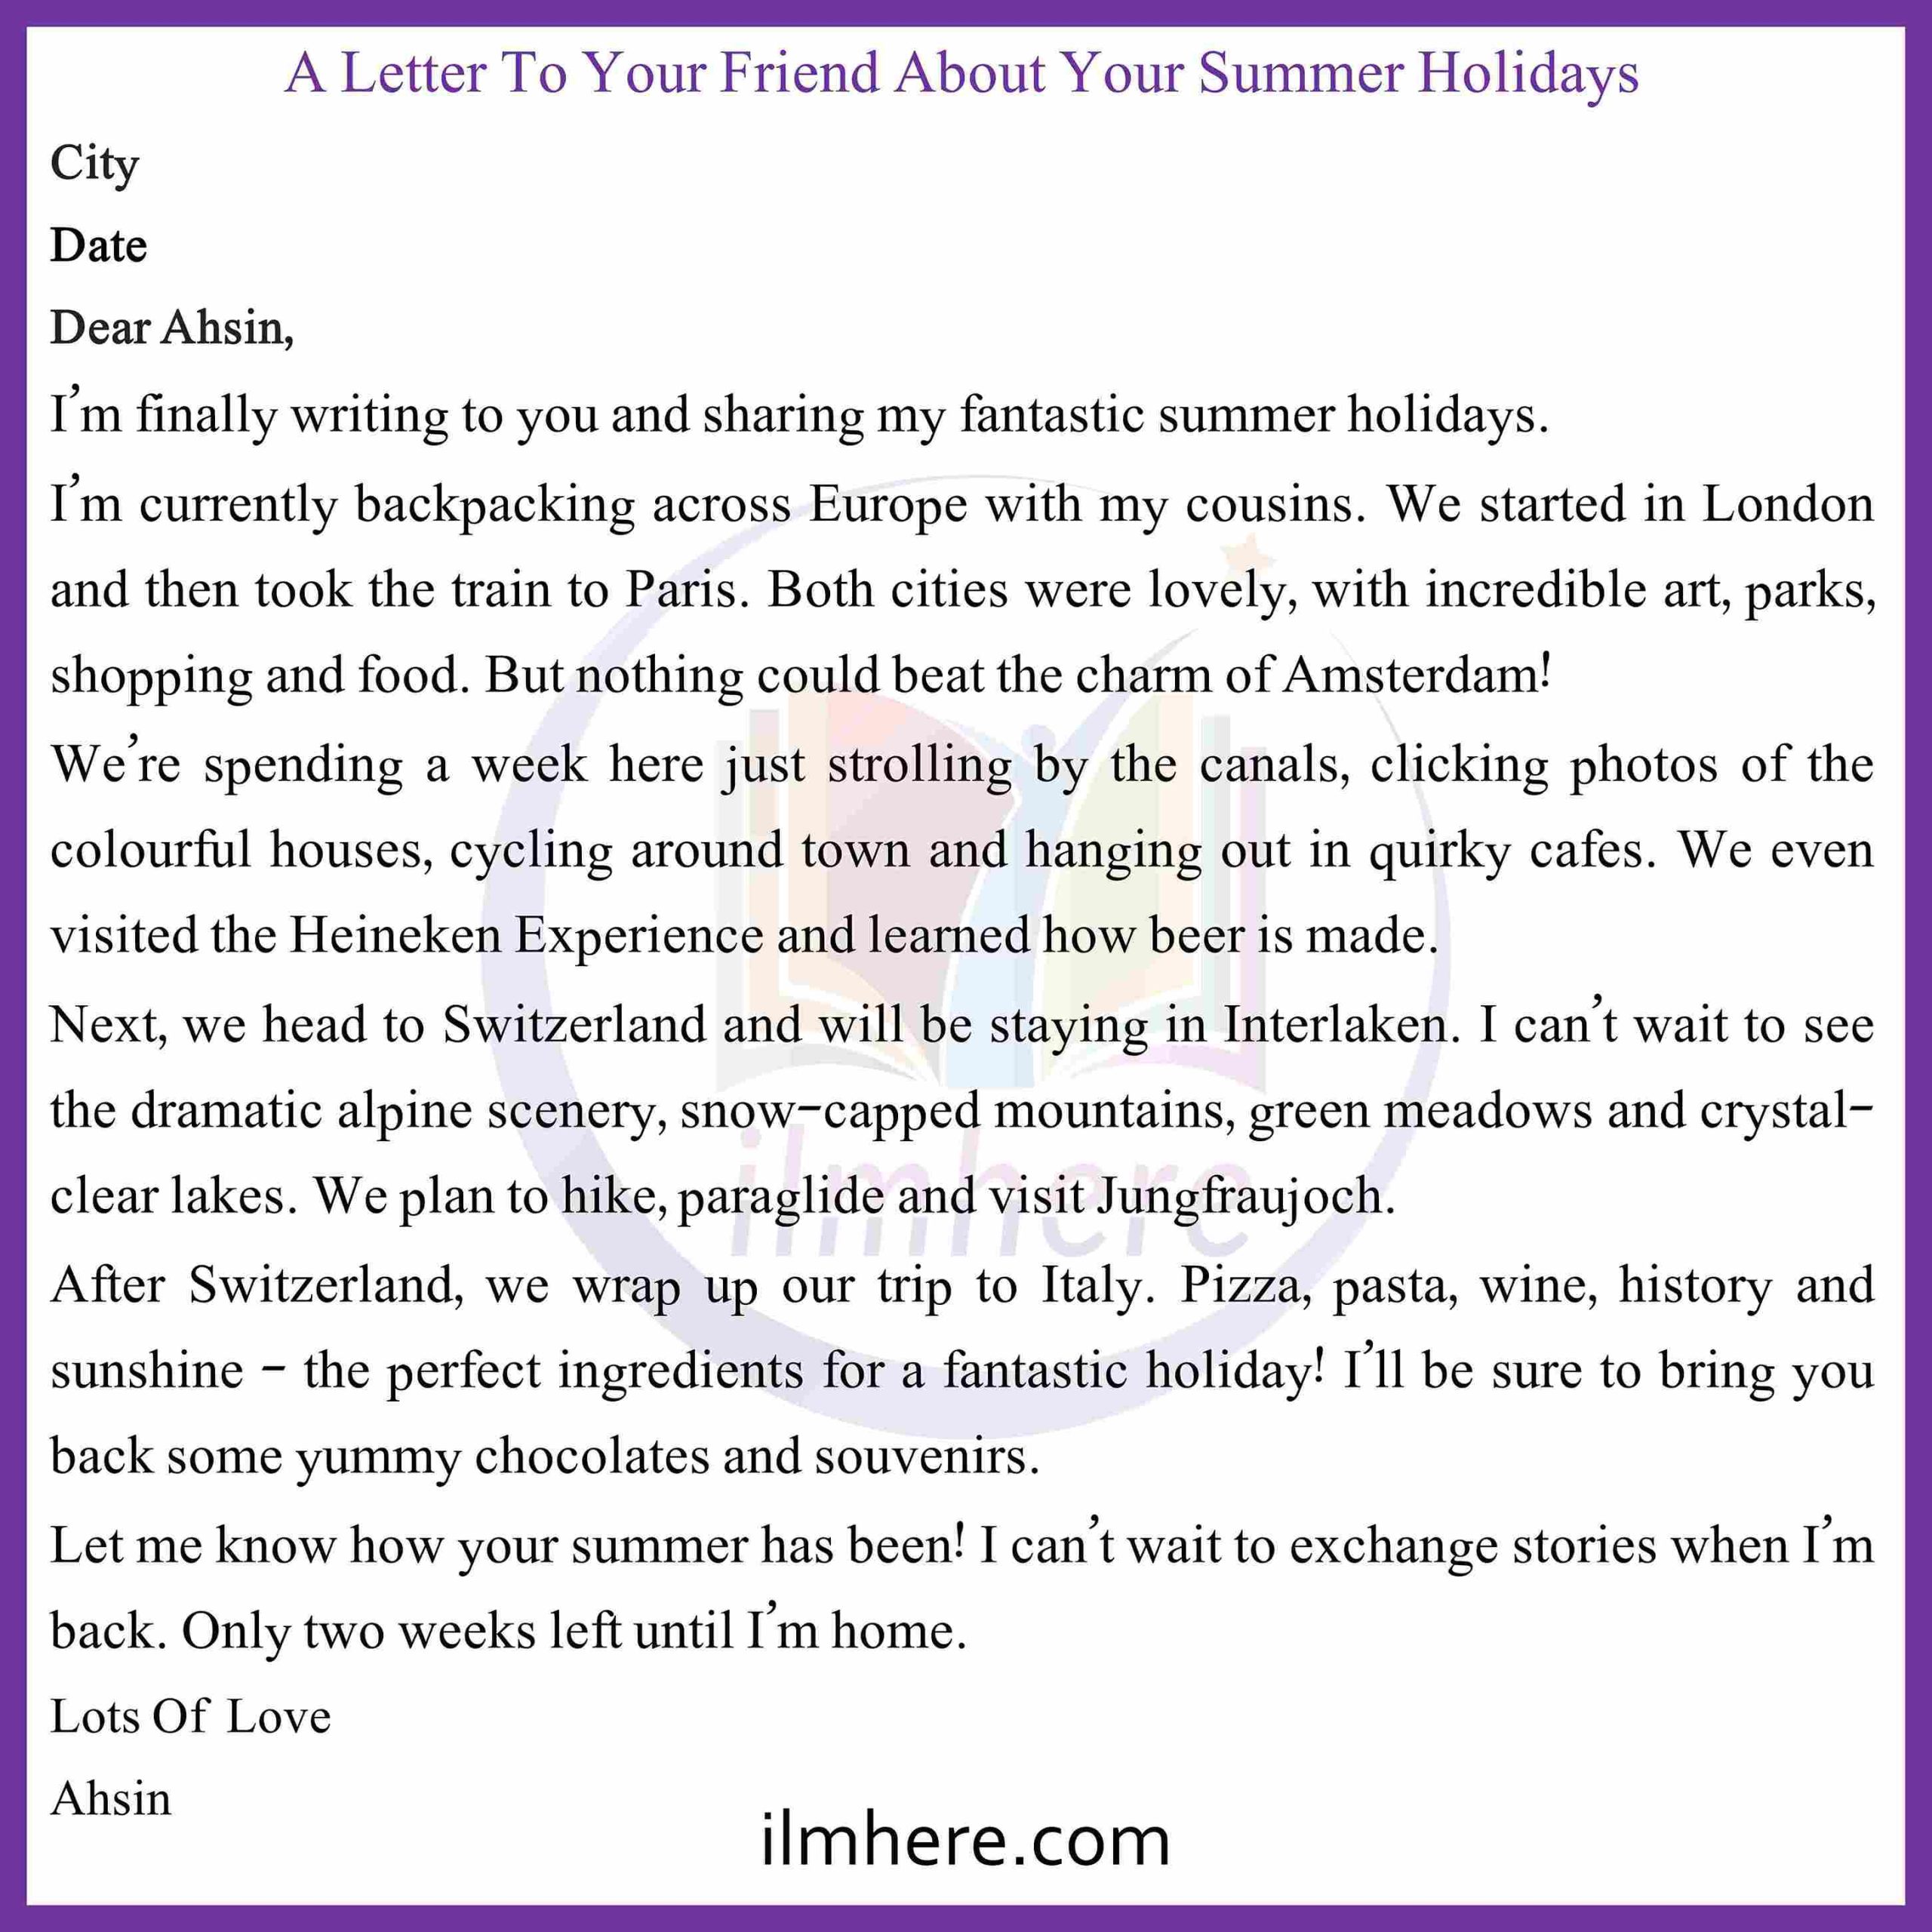 How to Write a Letter To Your Friend About Your Summer Holidays In an Informal Letter